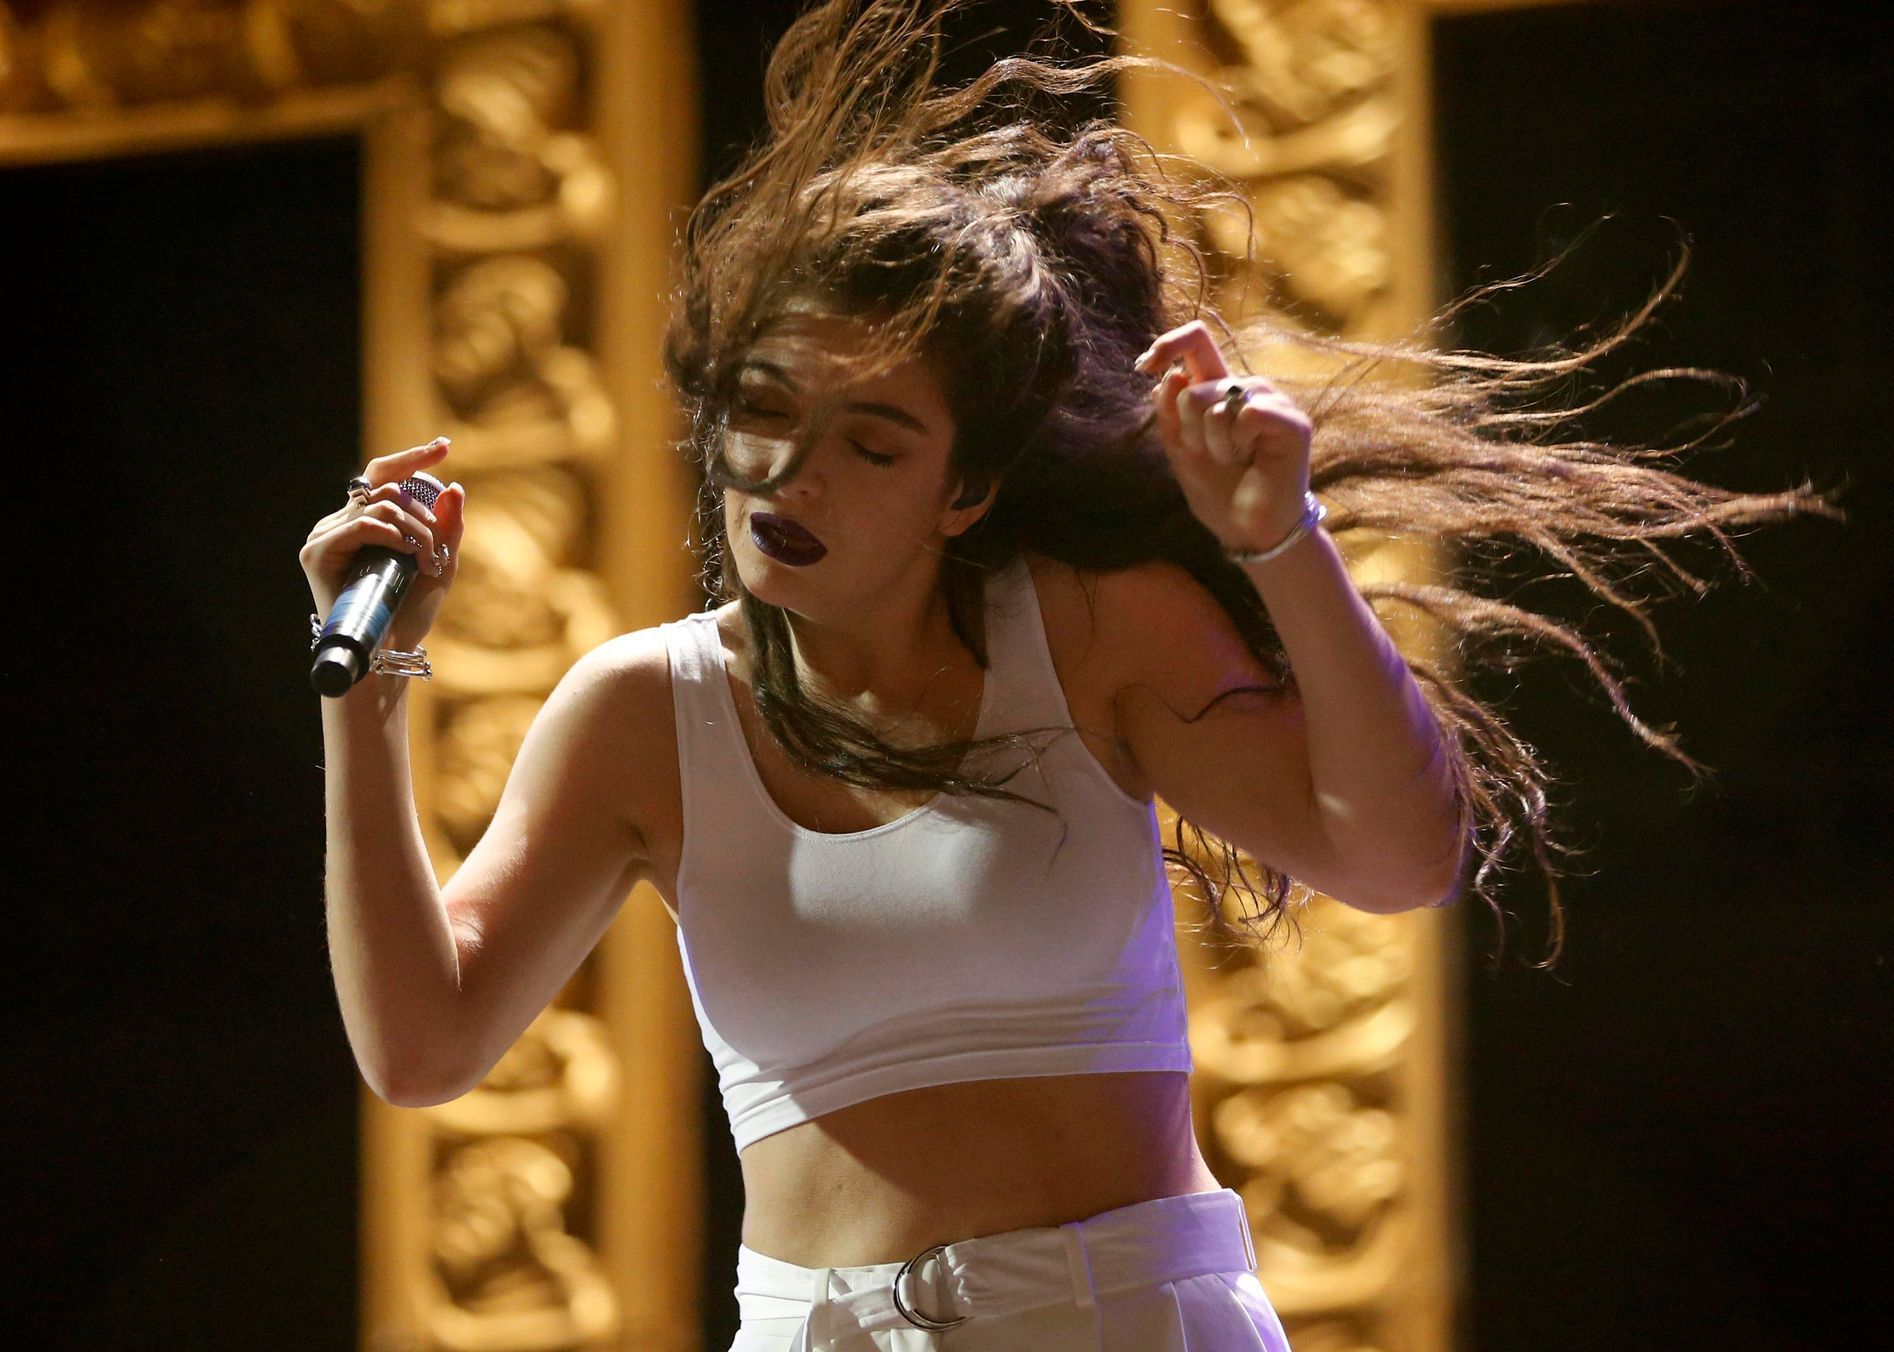 New Zealand singer-songwriter Lorde performs at the Coachella Valley Music and Arts Festival in Indio